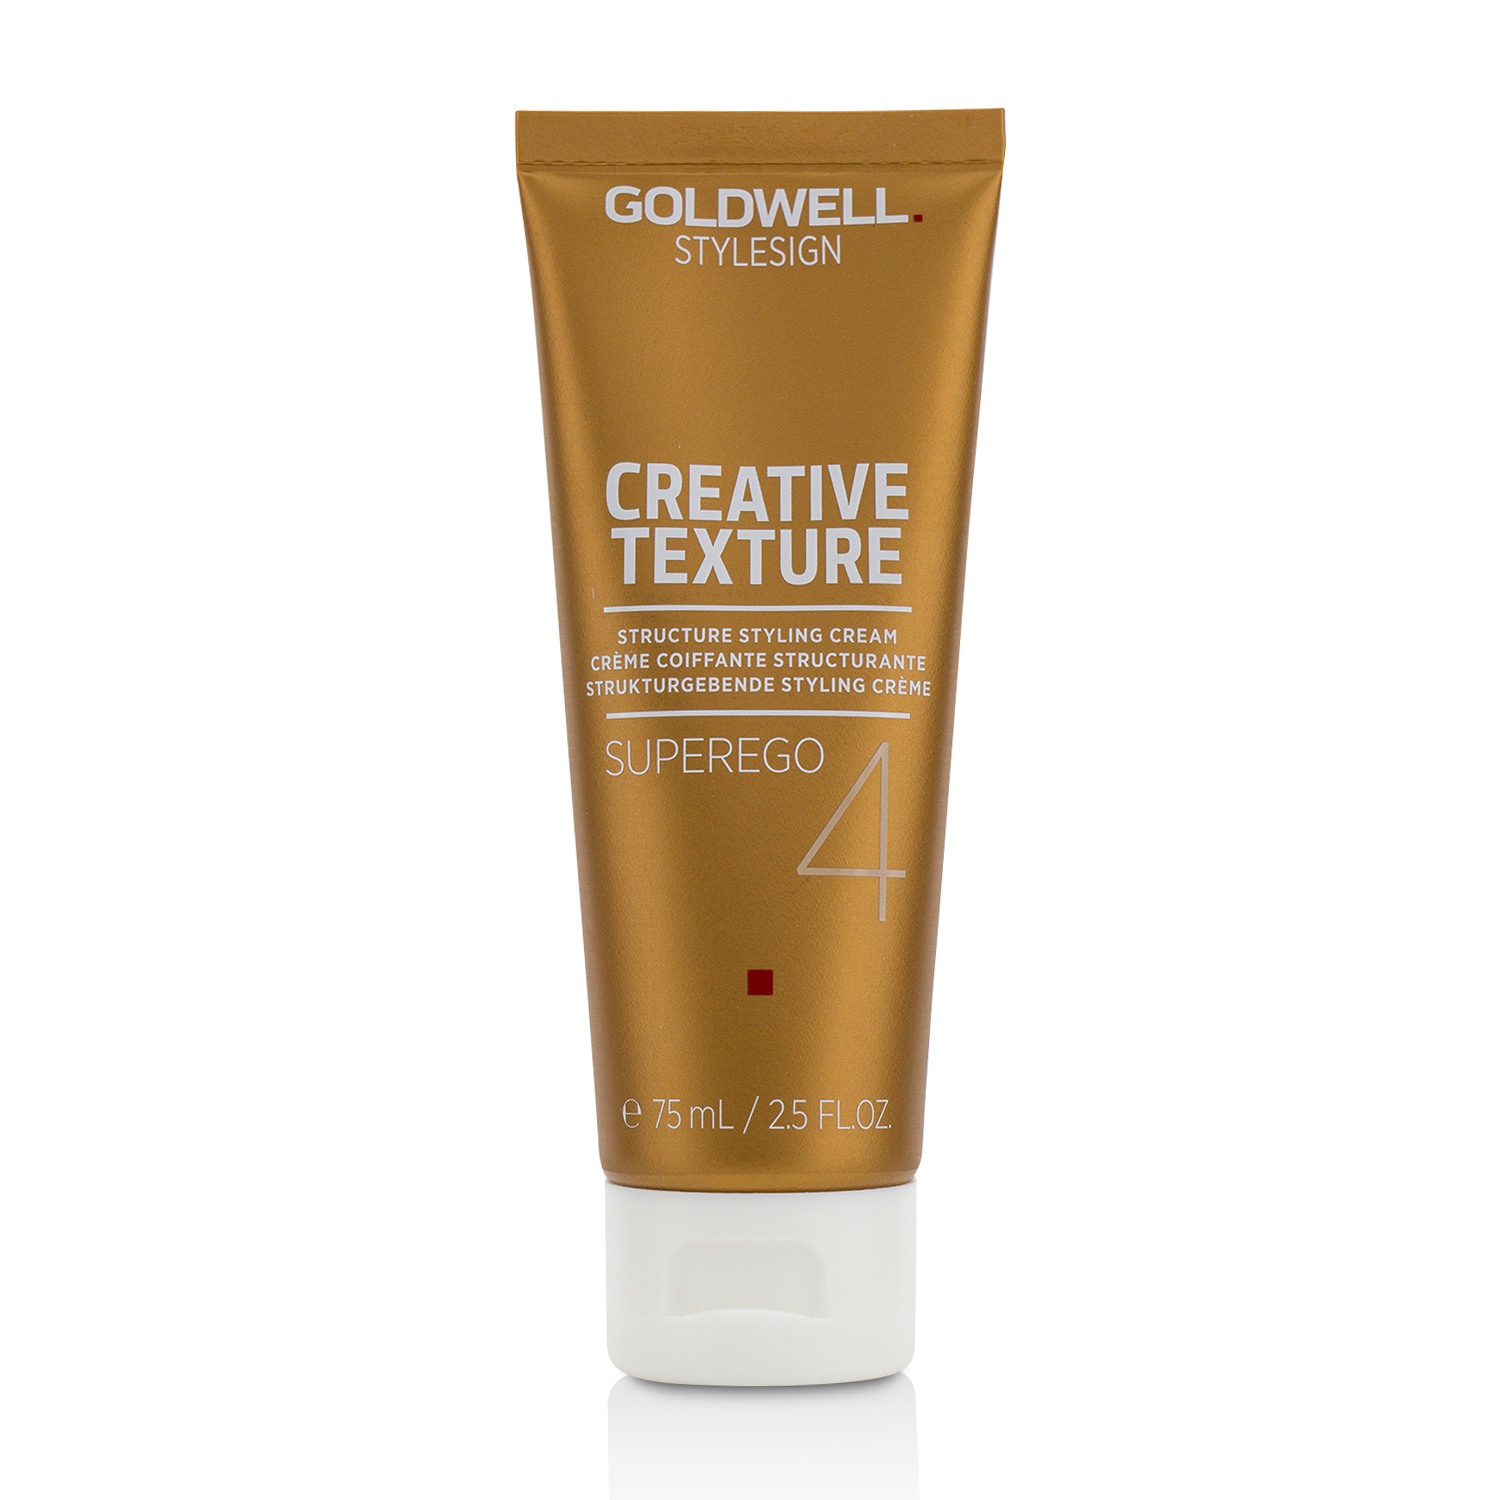 Style Sign Creative Texture Superego 4 Structure Styling Cream Goldwell Image